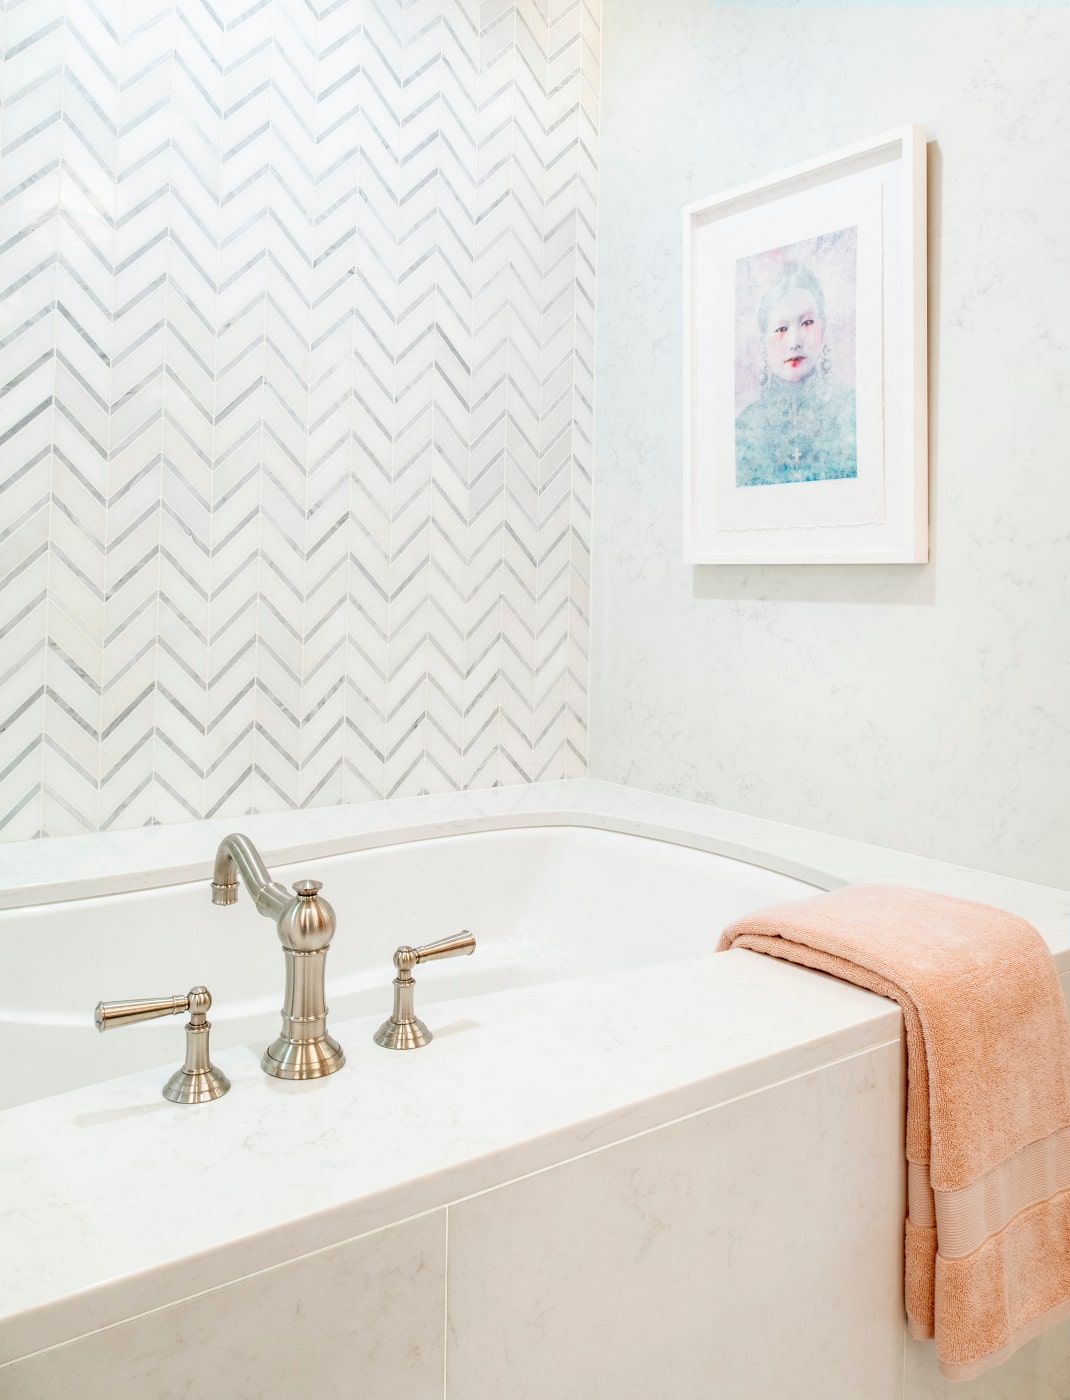 The herringbone mosaic behind the tub and shower offers a refreshing burst of ordered pattern, while the peach towels and rug add a blush of warmth.